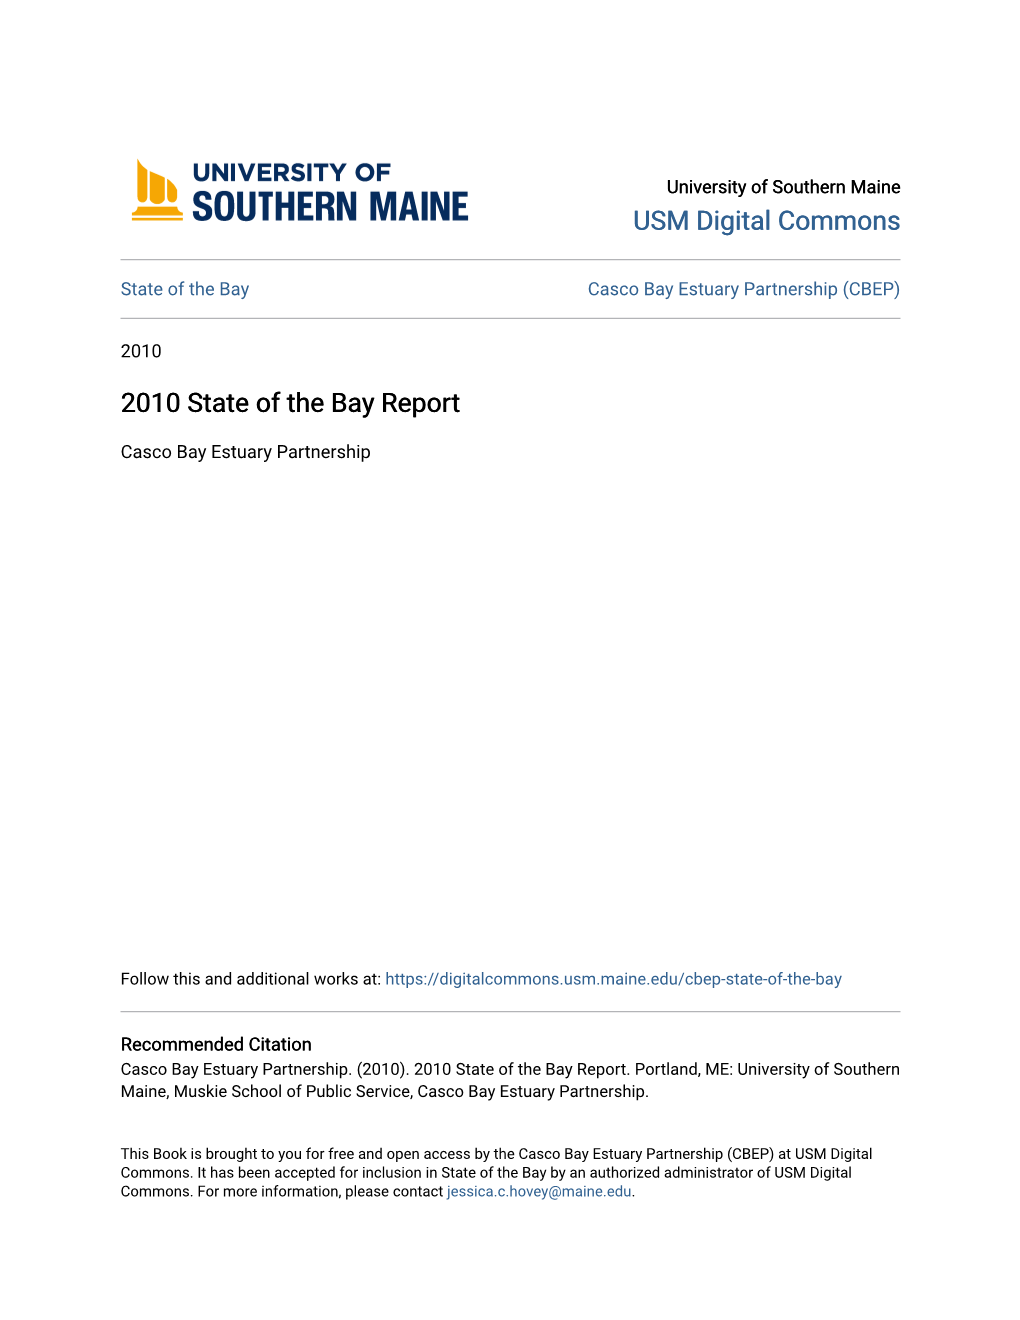 2010 State of the Bay Report